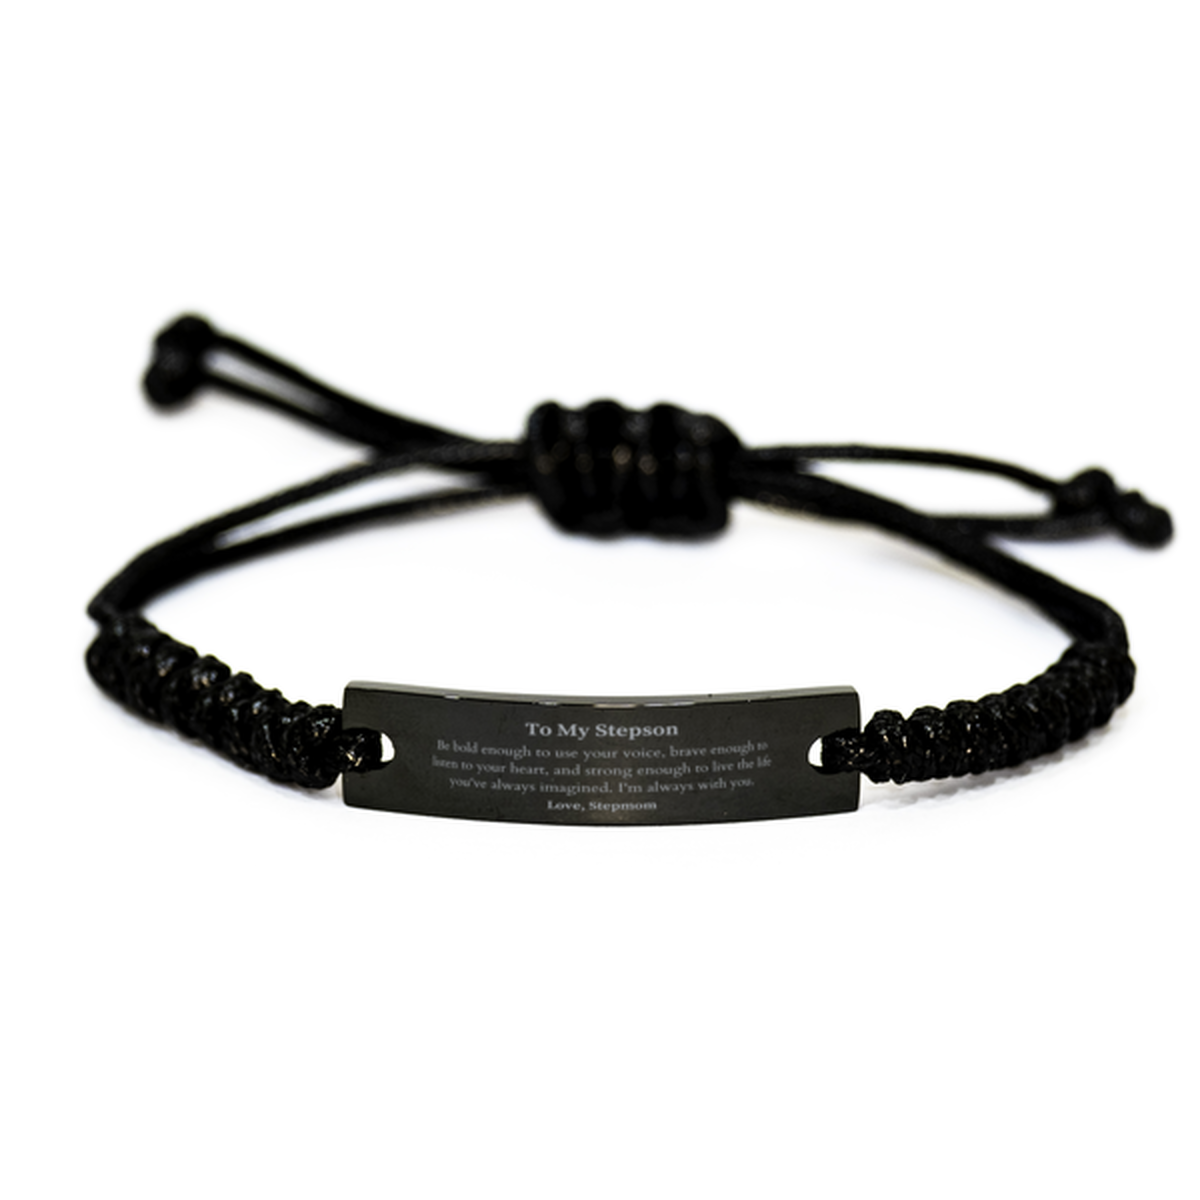 Keepsake Stepson Black Rope Bracelet Gift Idea Graduation Christmas Birthday Stepson from Stepmom, Stepson Be bold enough to use your voice, brave enough to listen to your heart. Love, Stepmom